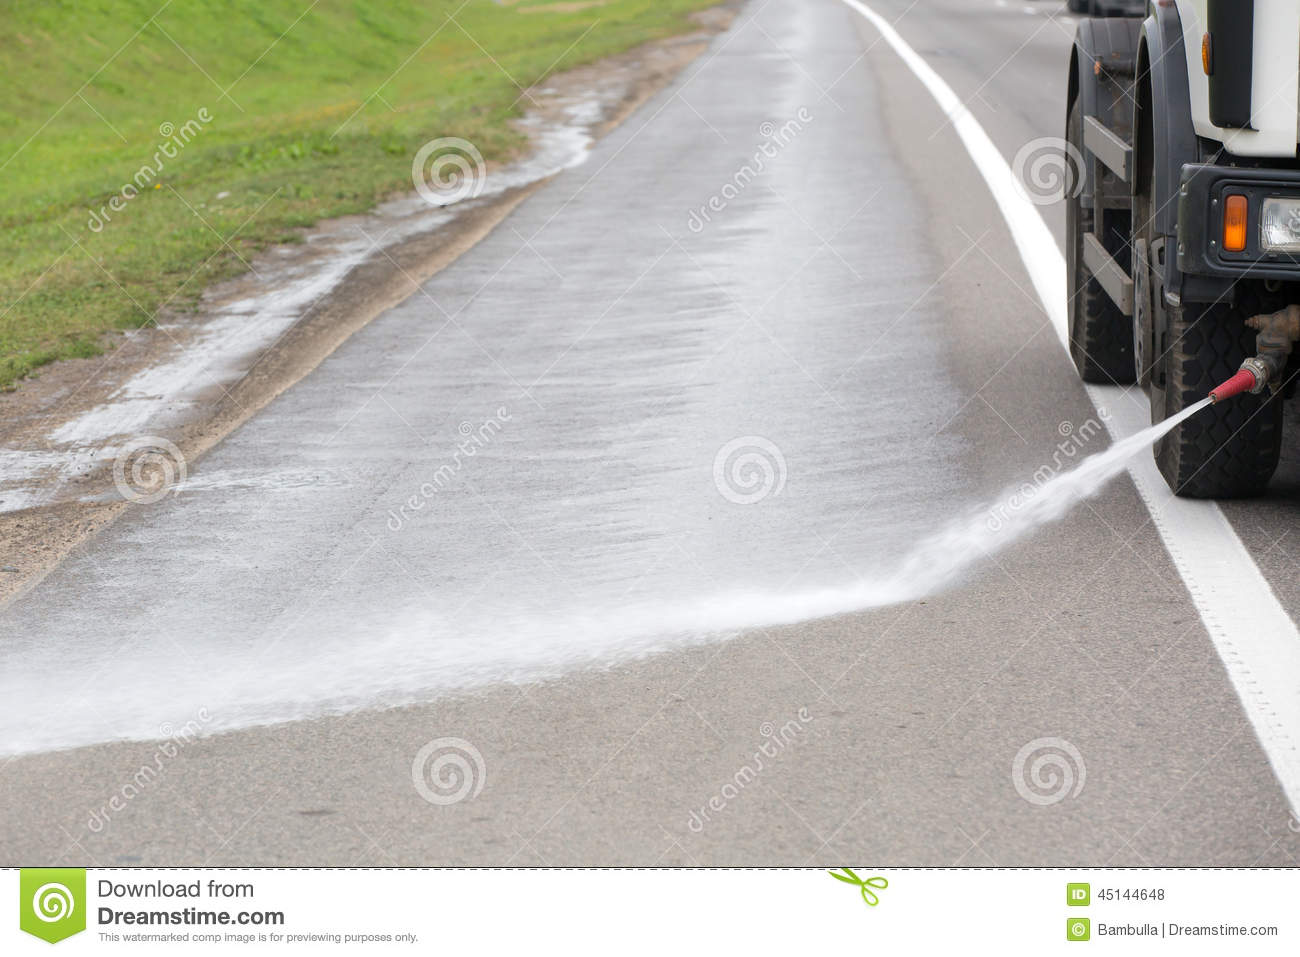 Roadside Cleaning With Water Jet Stock Photo   Image  45144648